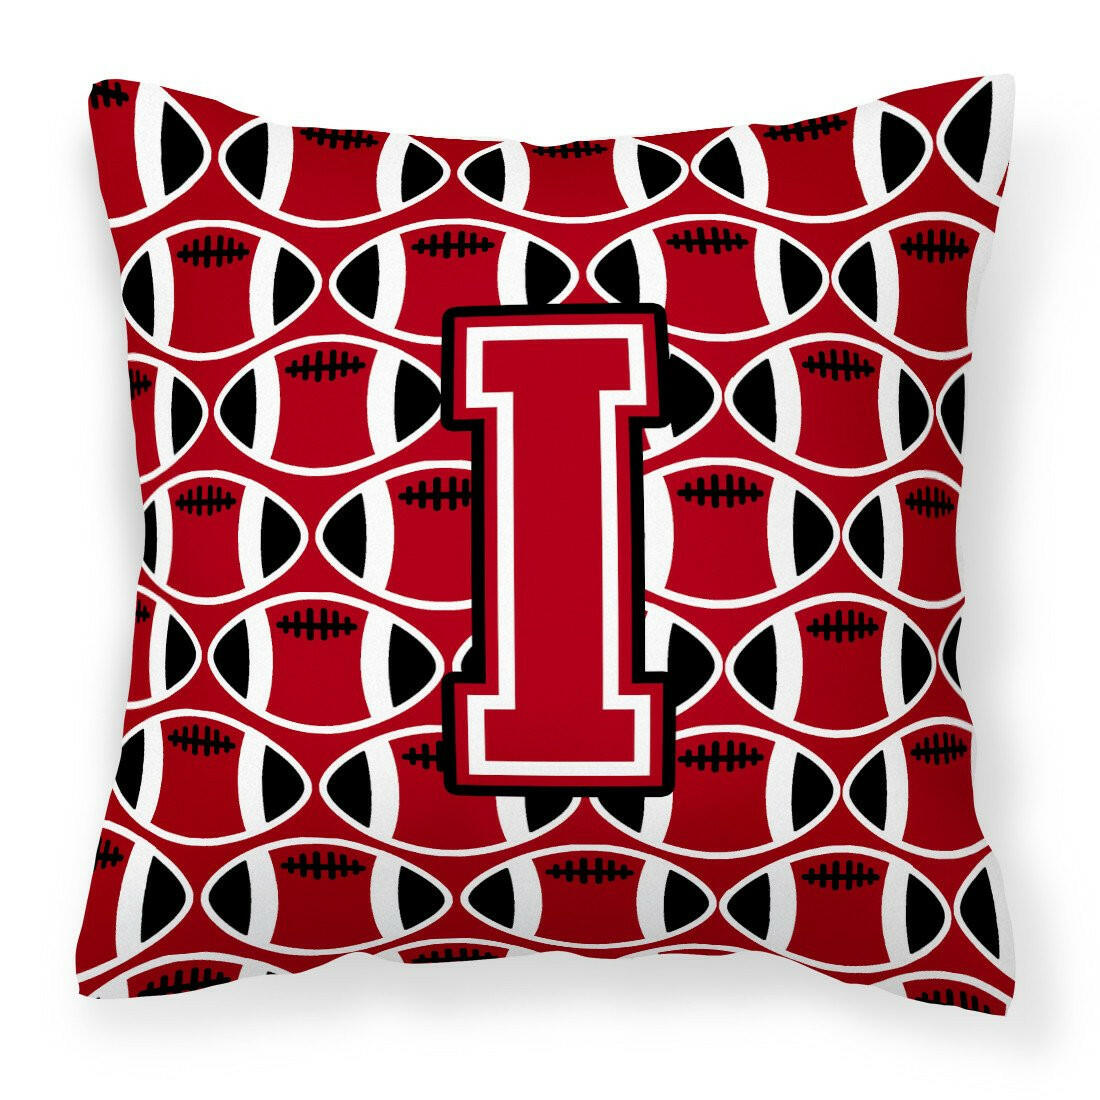 Letter I Football Red, Black and White Fabric Decorative Pillow CJ1073-IPW1414 by Caroline's Treasures